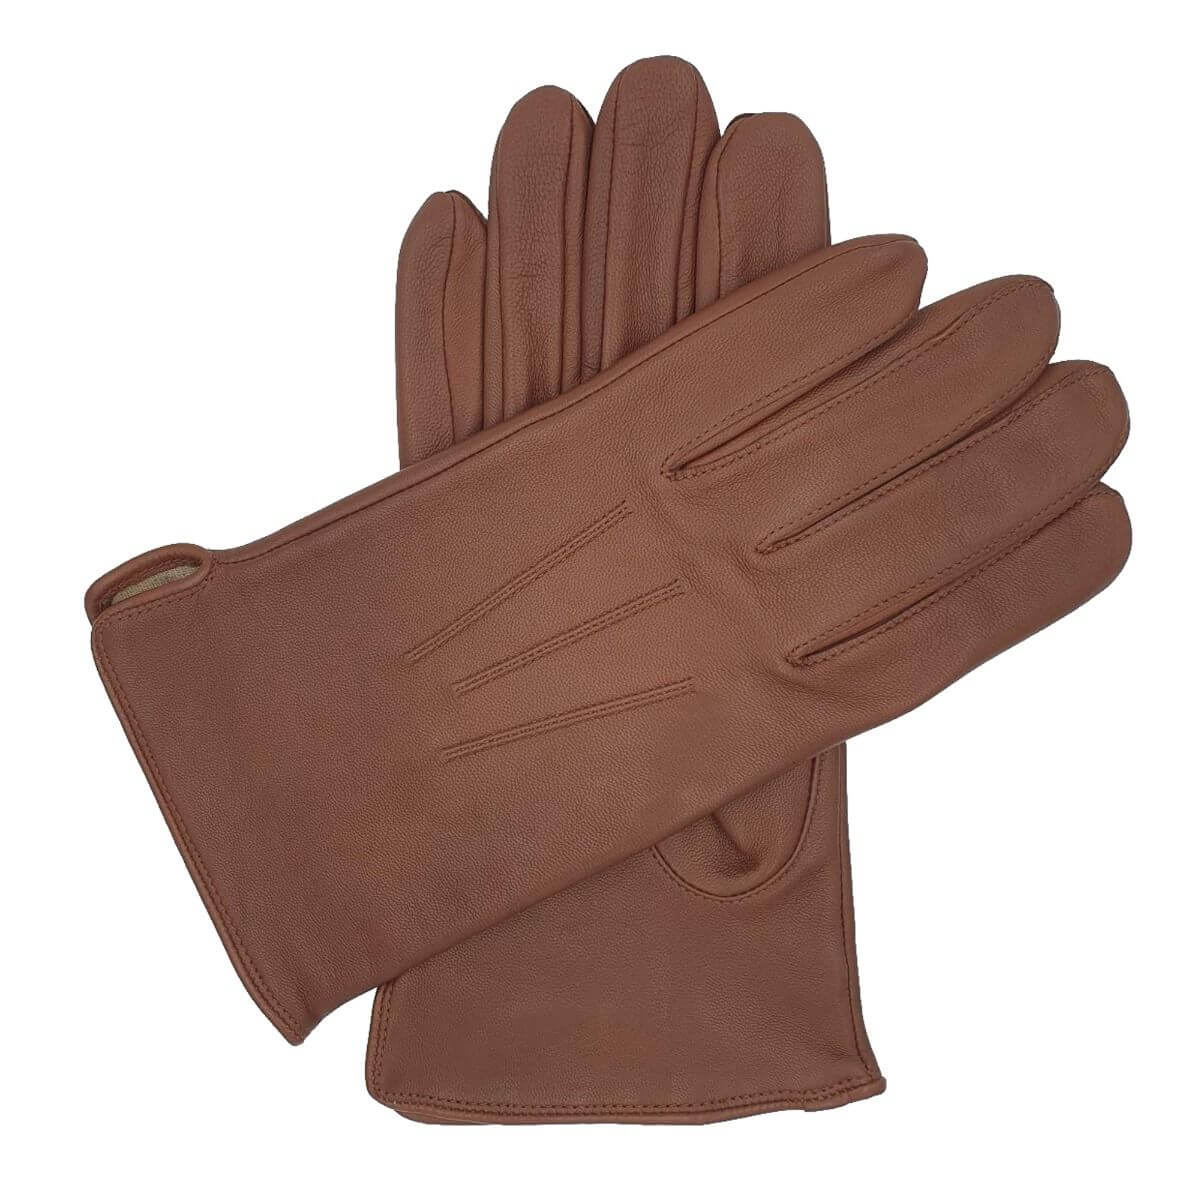 Southcombe Hinton - Silk Lined Leather Gloves - Conker